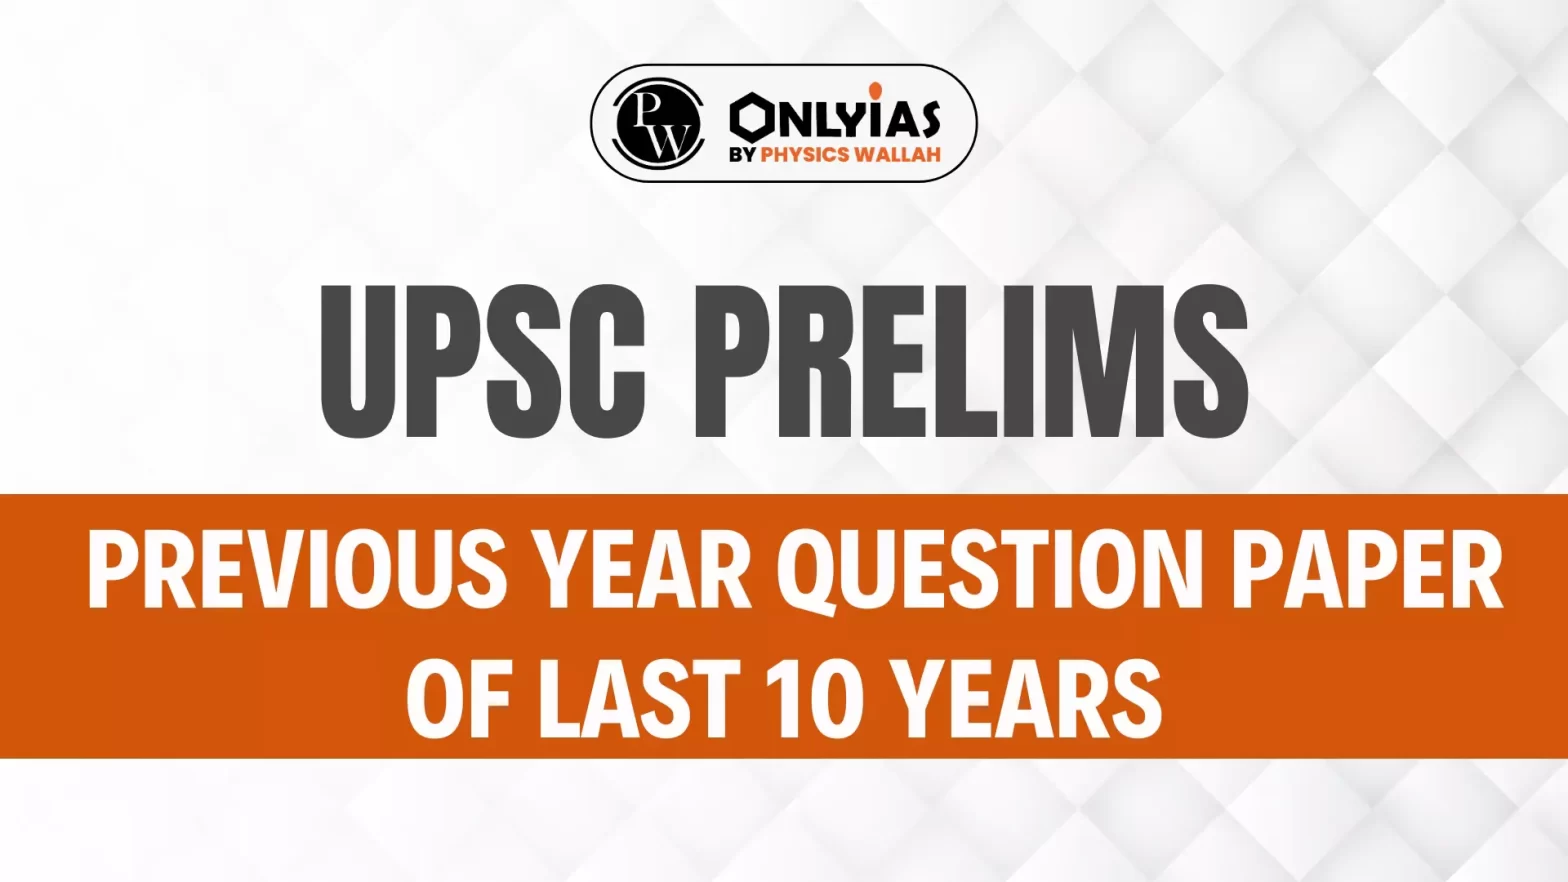 UPSC Prelims Question Papers of Last 10 Years